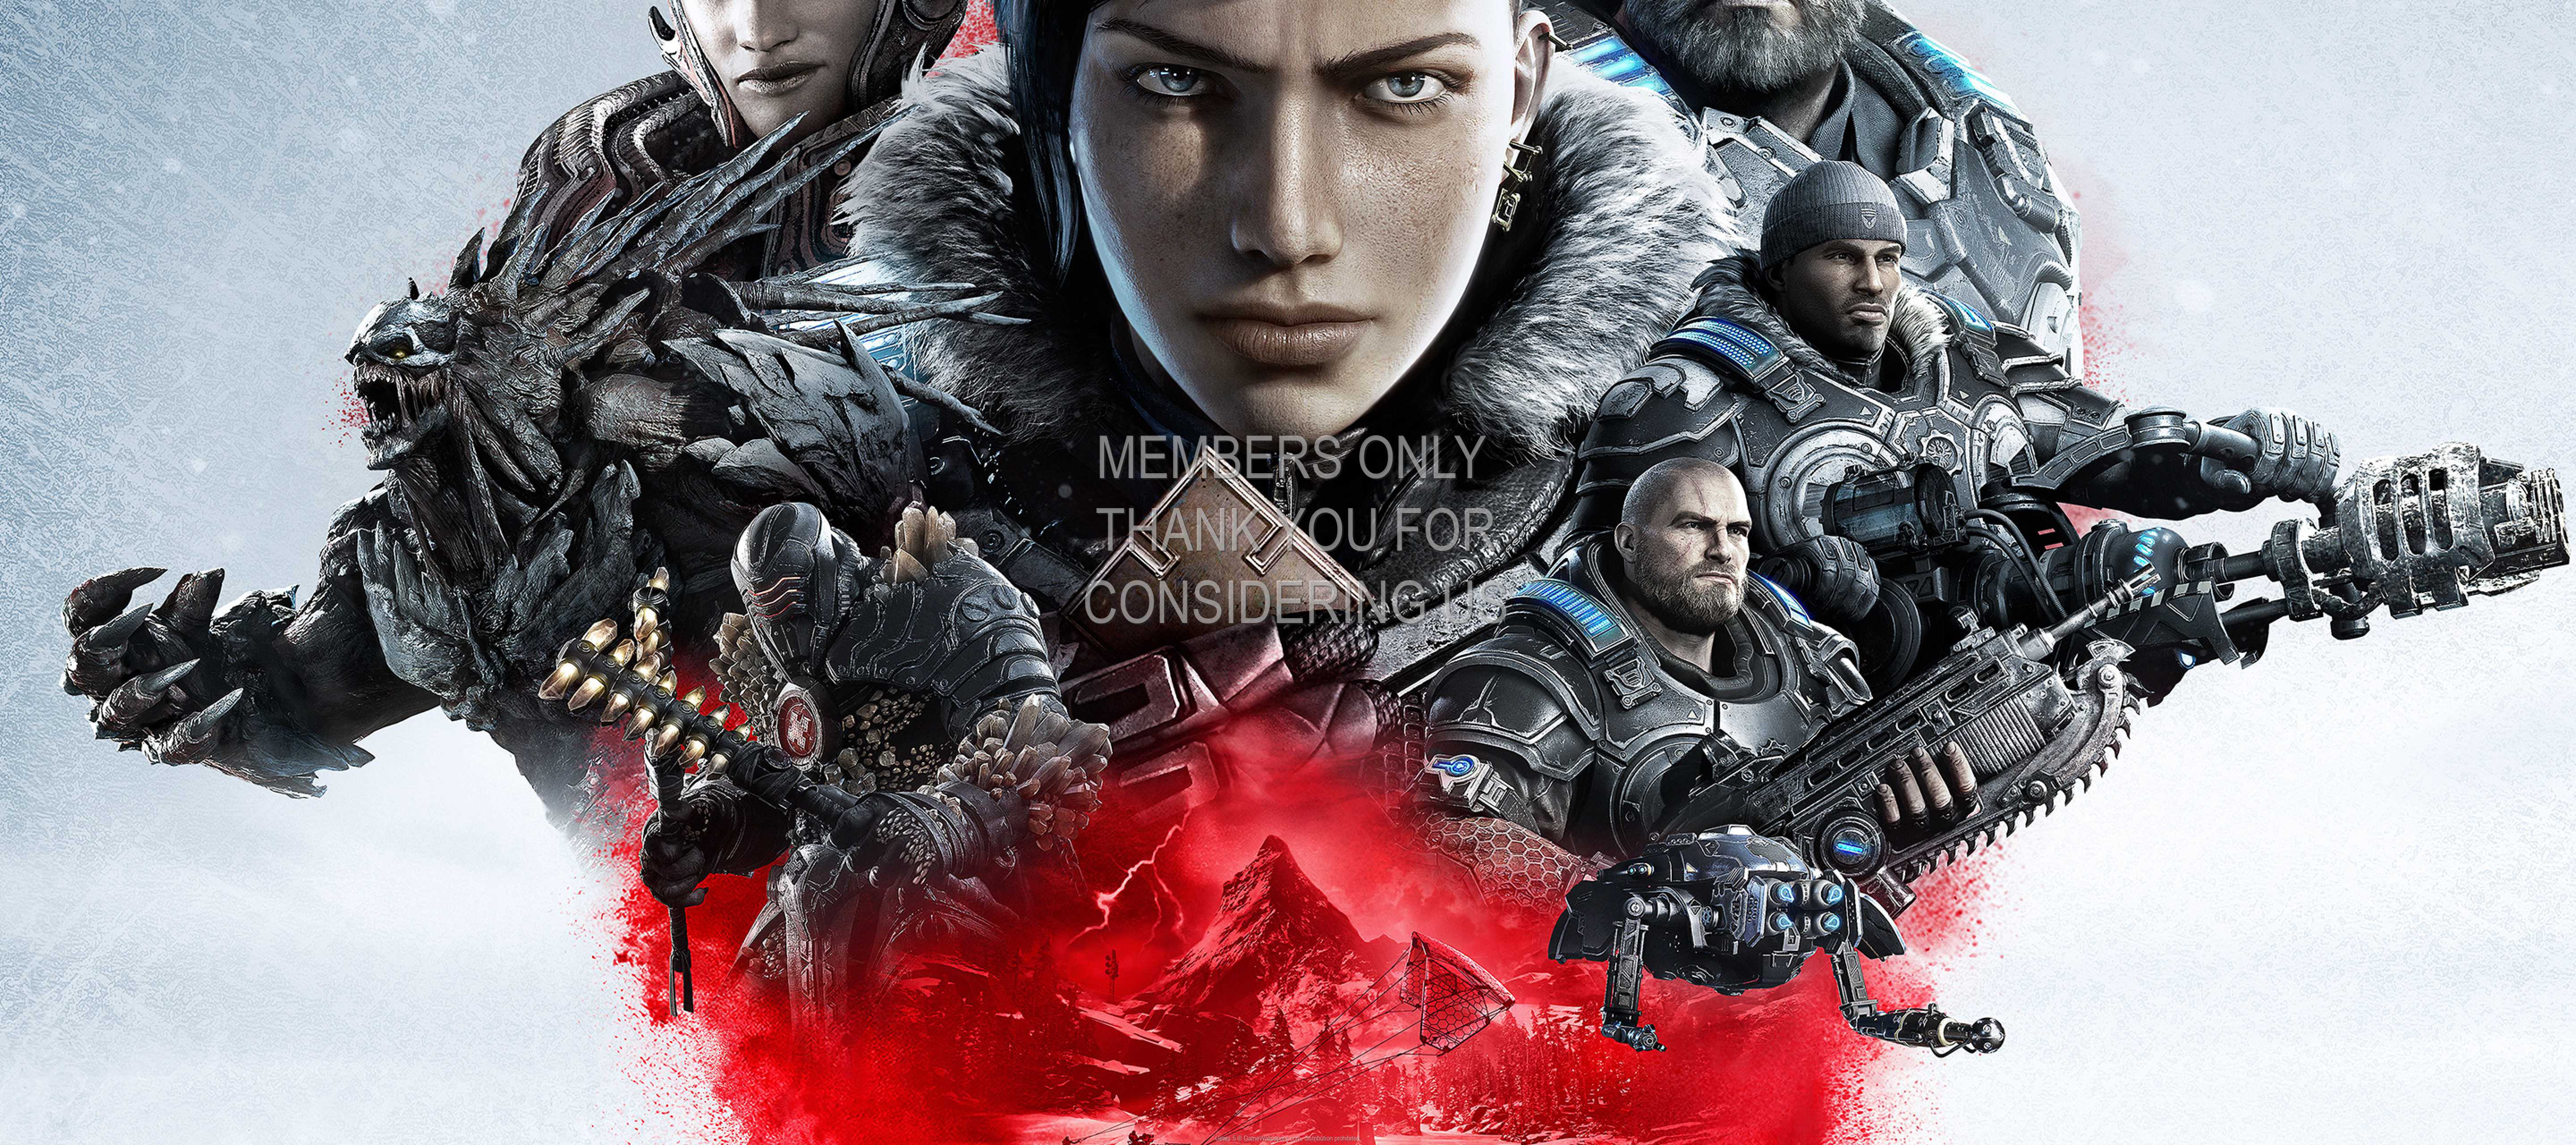 Gears 5 1440p%20Horizontal Mobile wallpaper or background 01